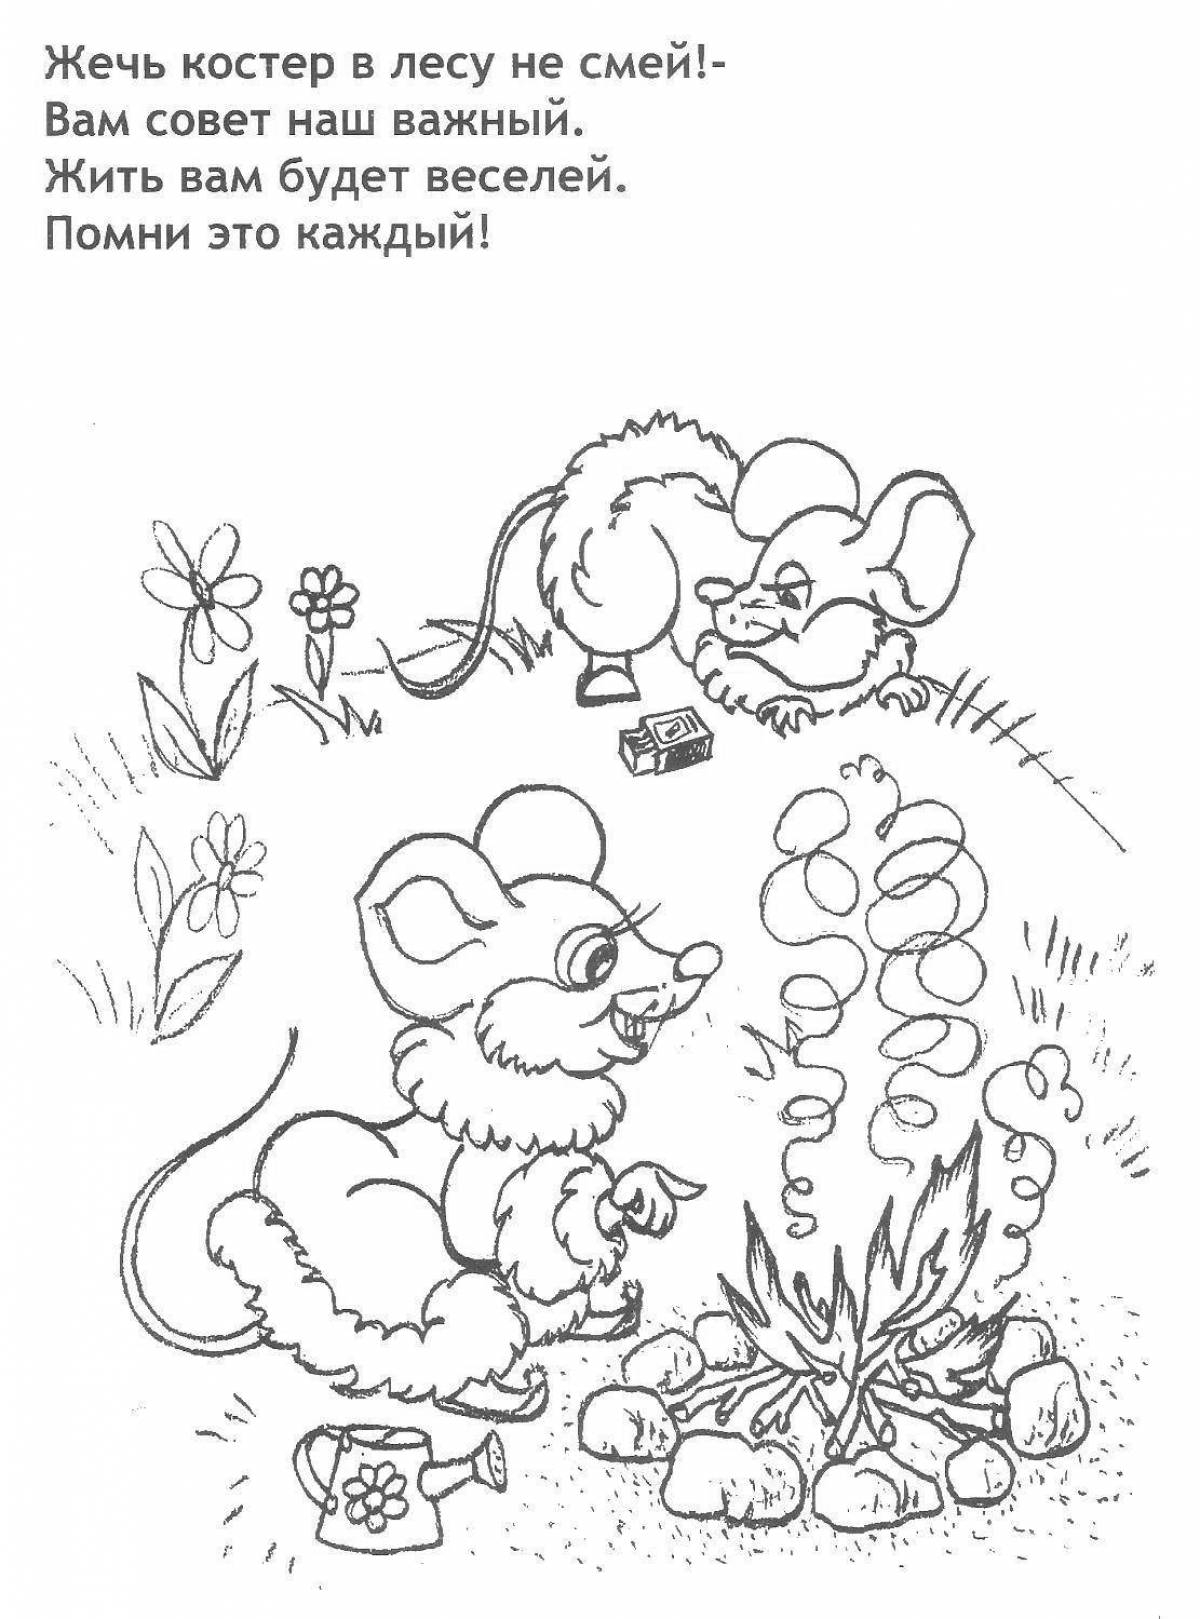 Luminous coloring books for children rules of conduct in the forest